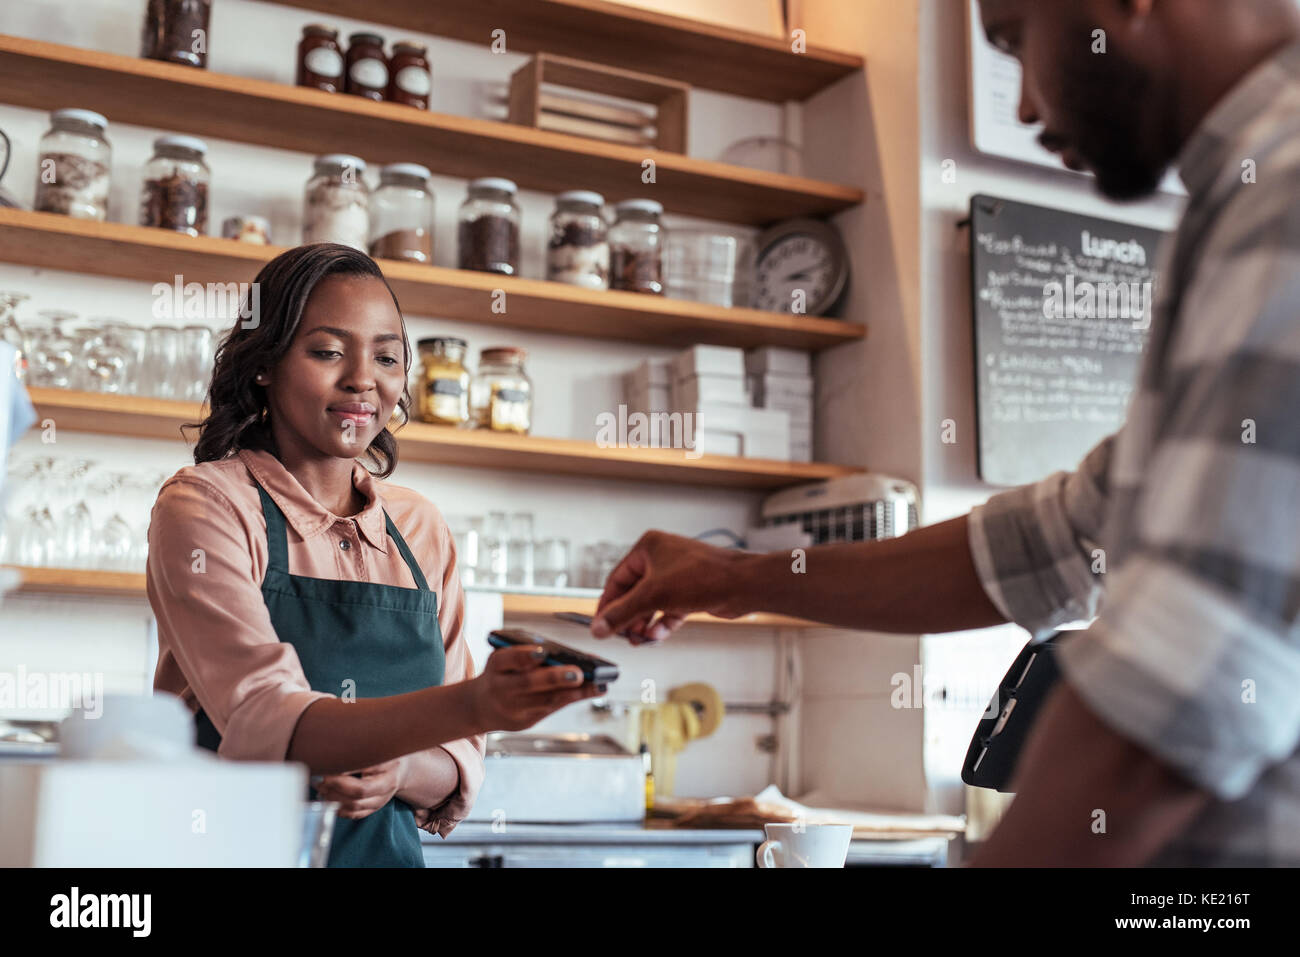 Customer using a bank card and nfs technology to pay a barista for a purchase at a cafe Stock Photo